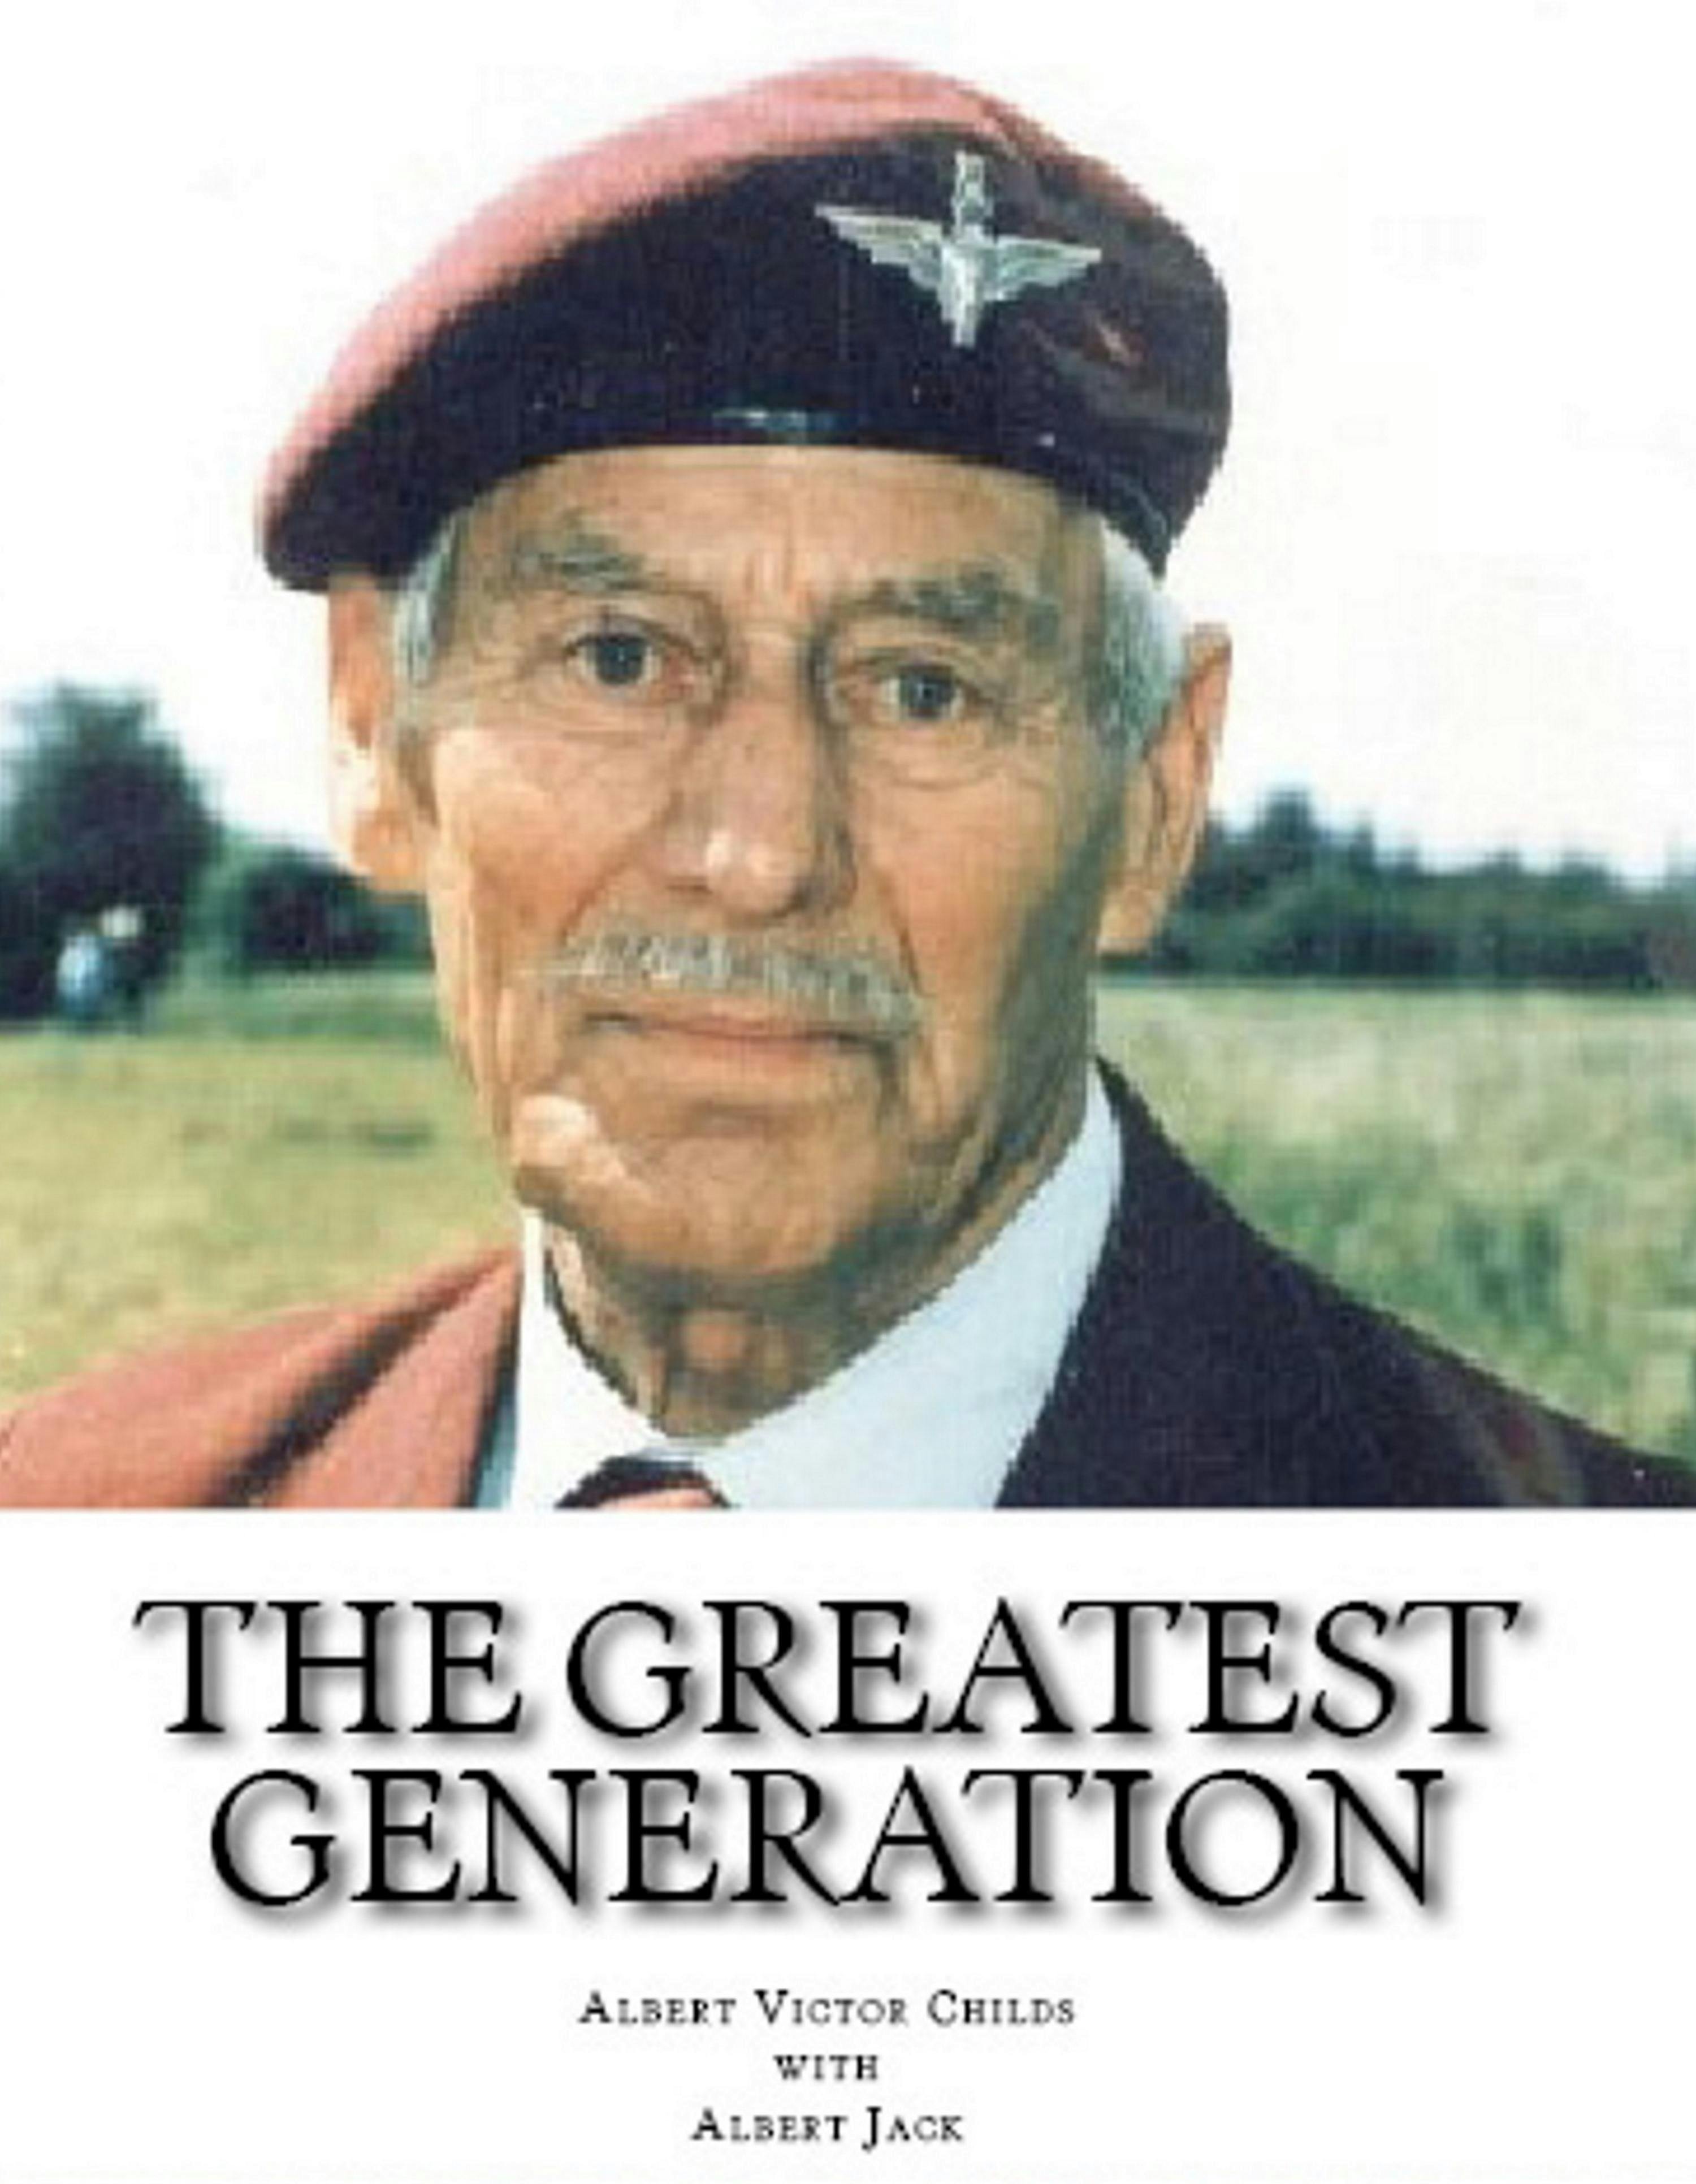 The Greatest Generation: Diary of at 1st & 6th Airborne Paratrooper (1940-1950) - Albert Childs, Albert Jack